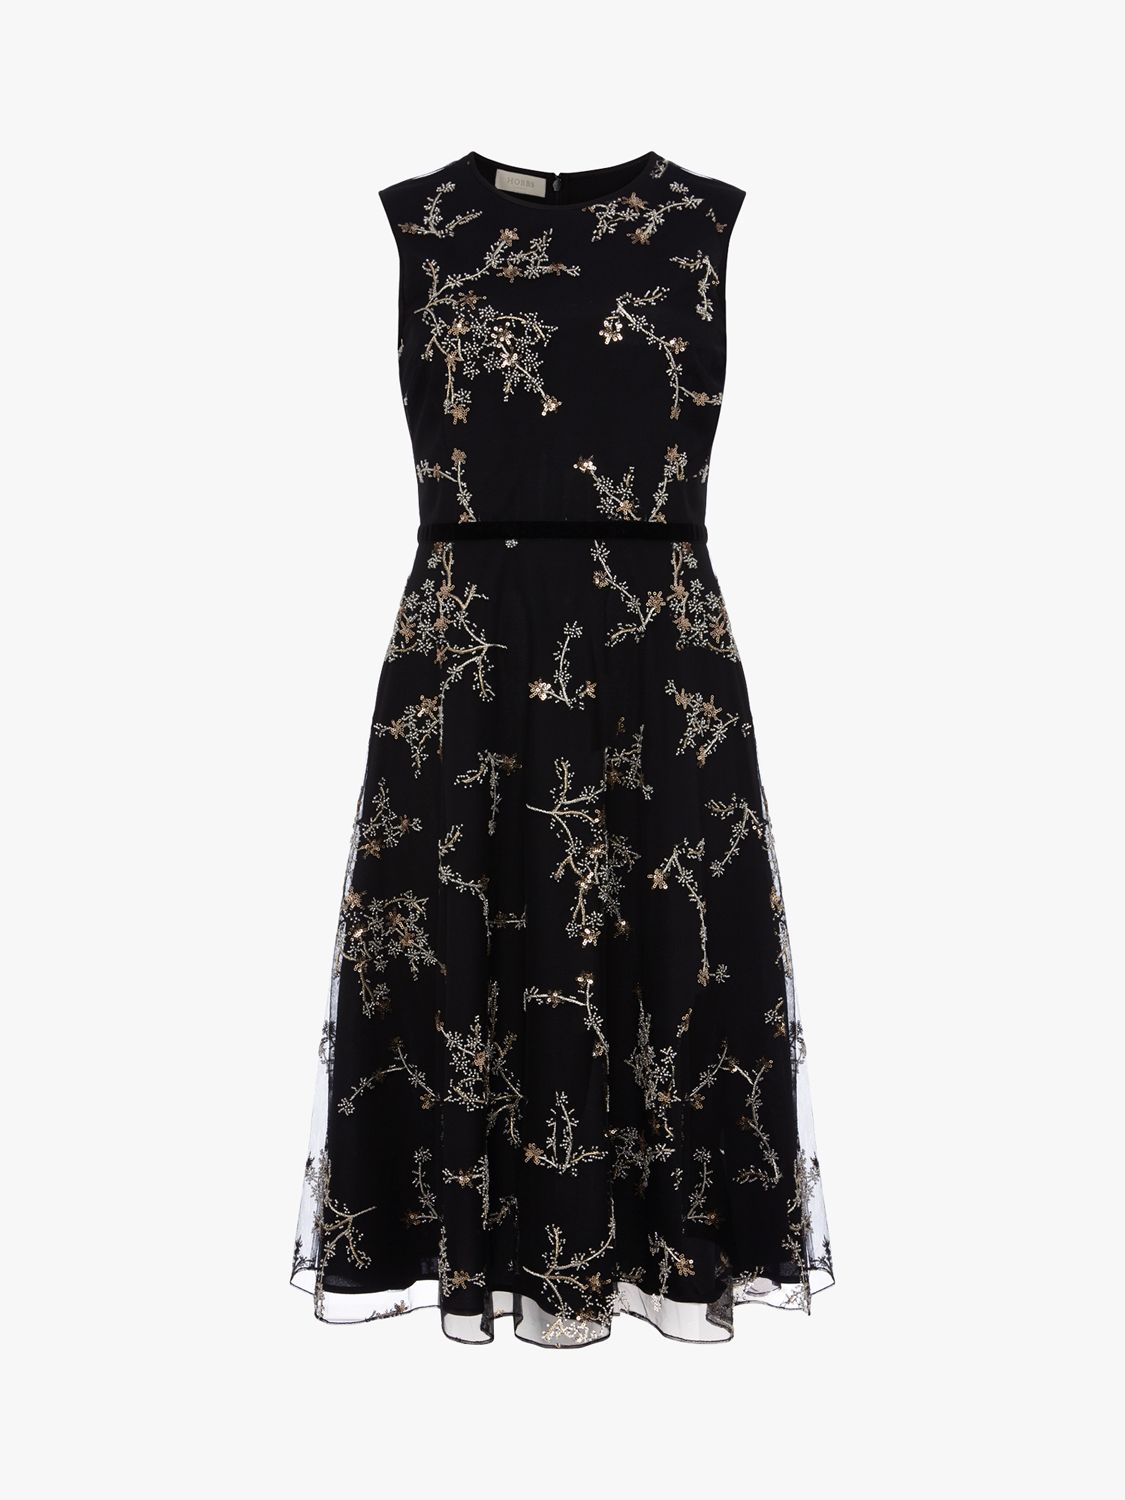 Hobbs Lilith Floral Embroidered Knee Length Dress, Black/Metallic